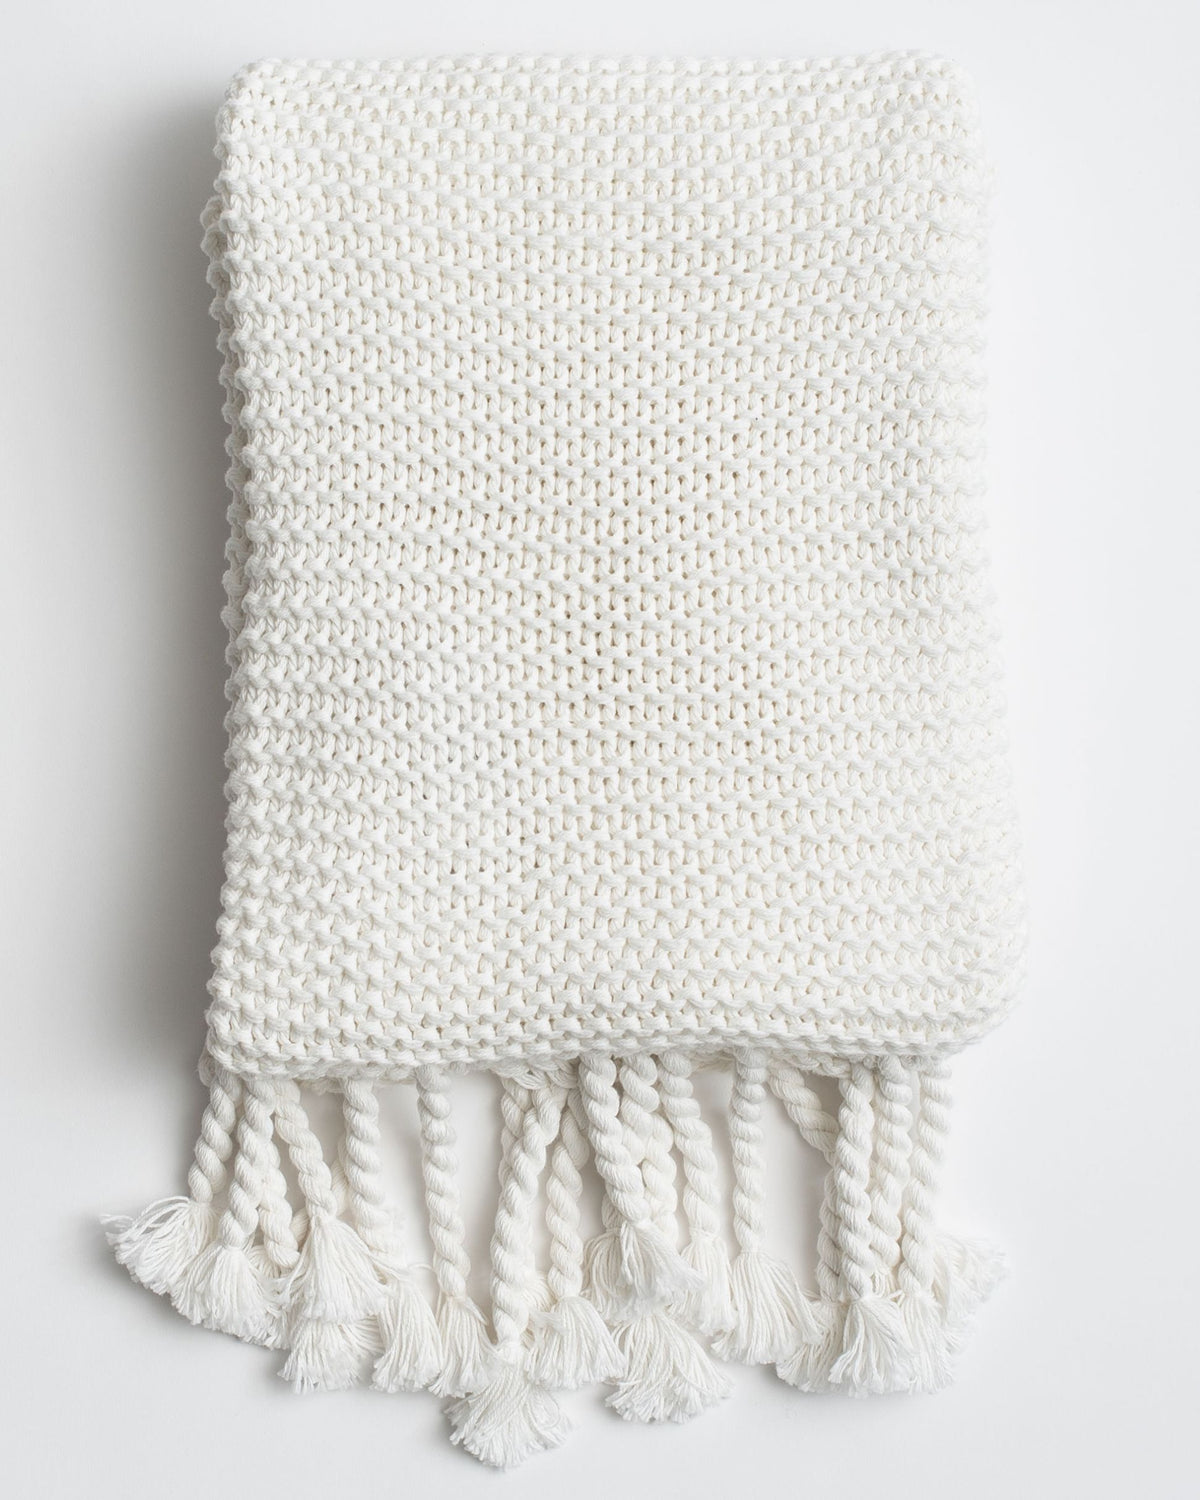 Organic Cotton Comfy Knit Throw shown in Soft White